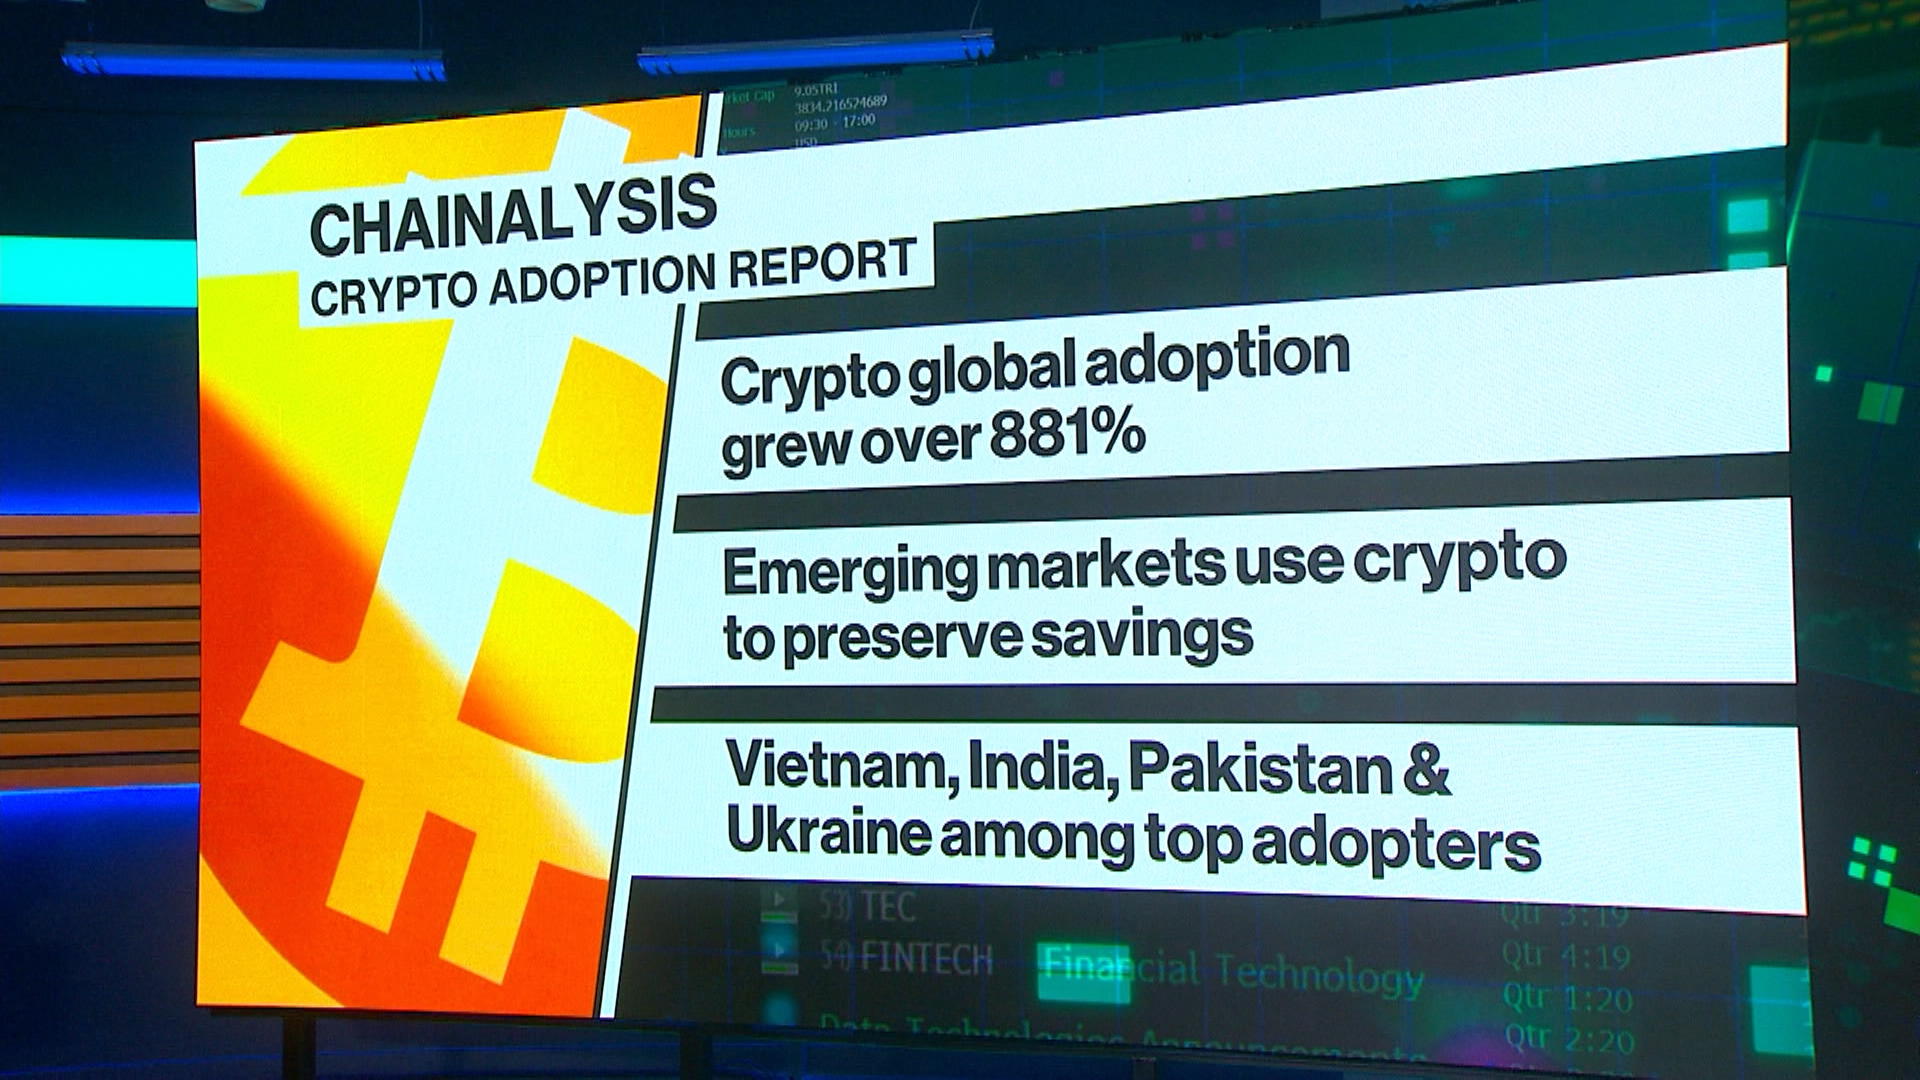 Chainalysis CEO: Bitcoin Could Go Past $100k This Year - Bloomberg